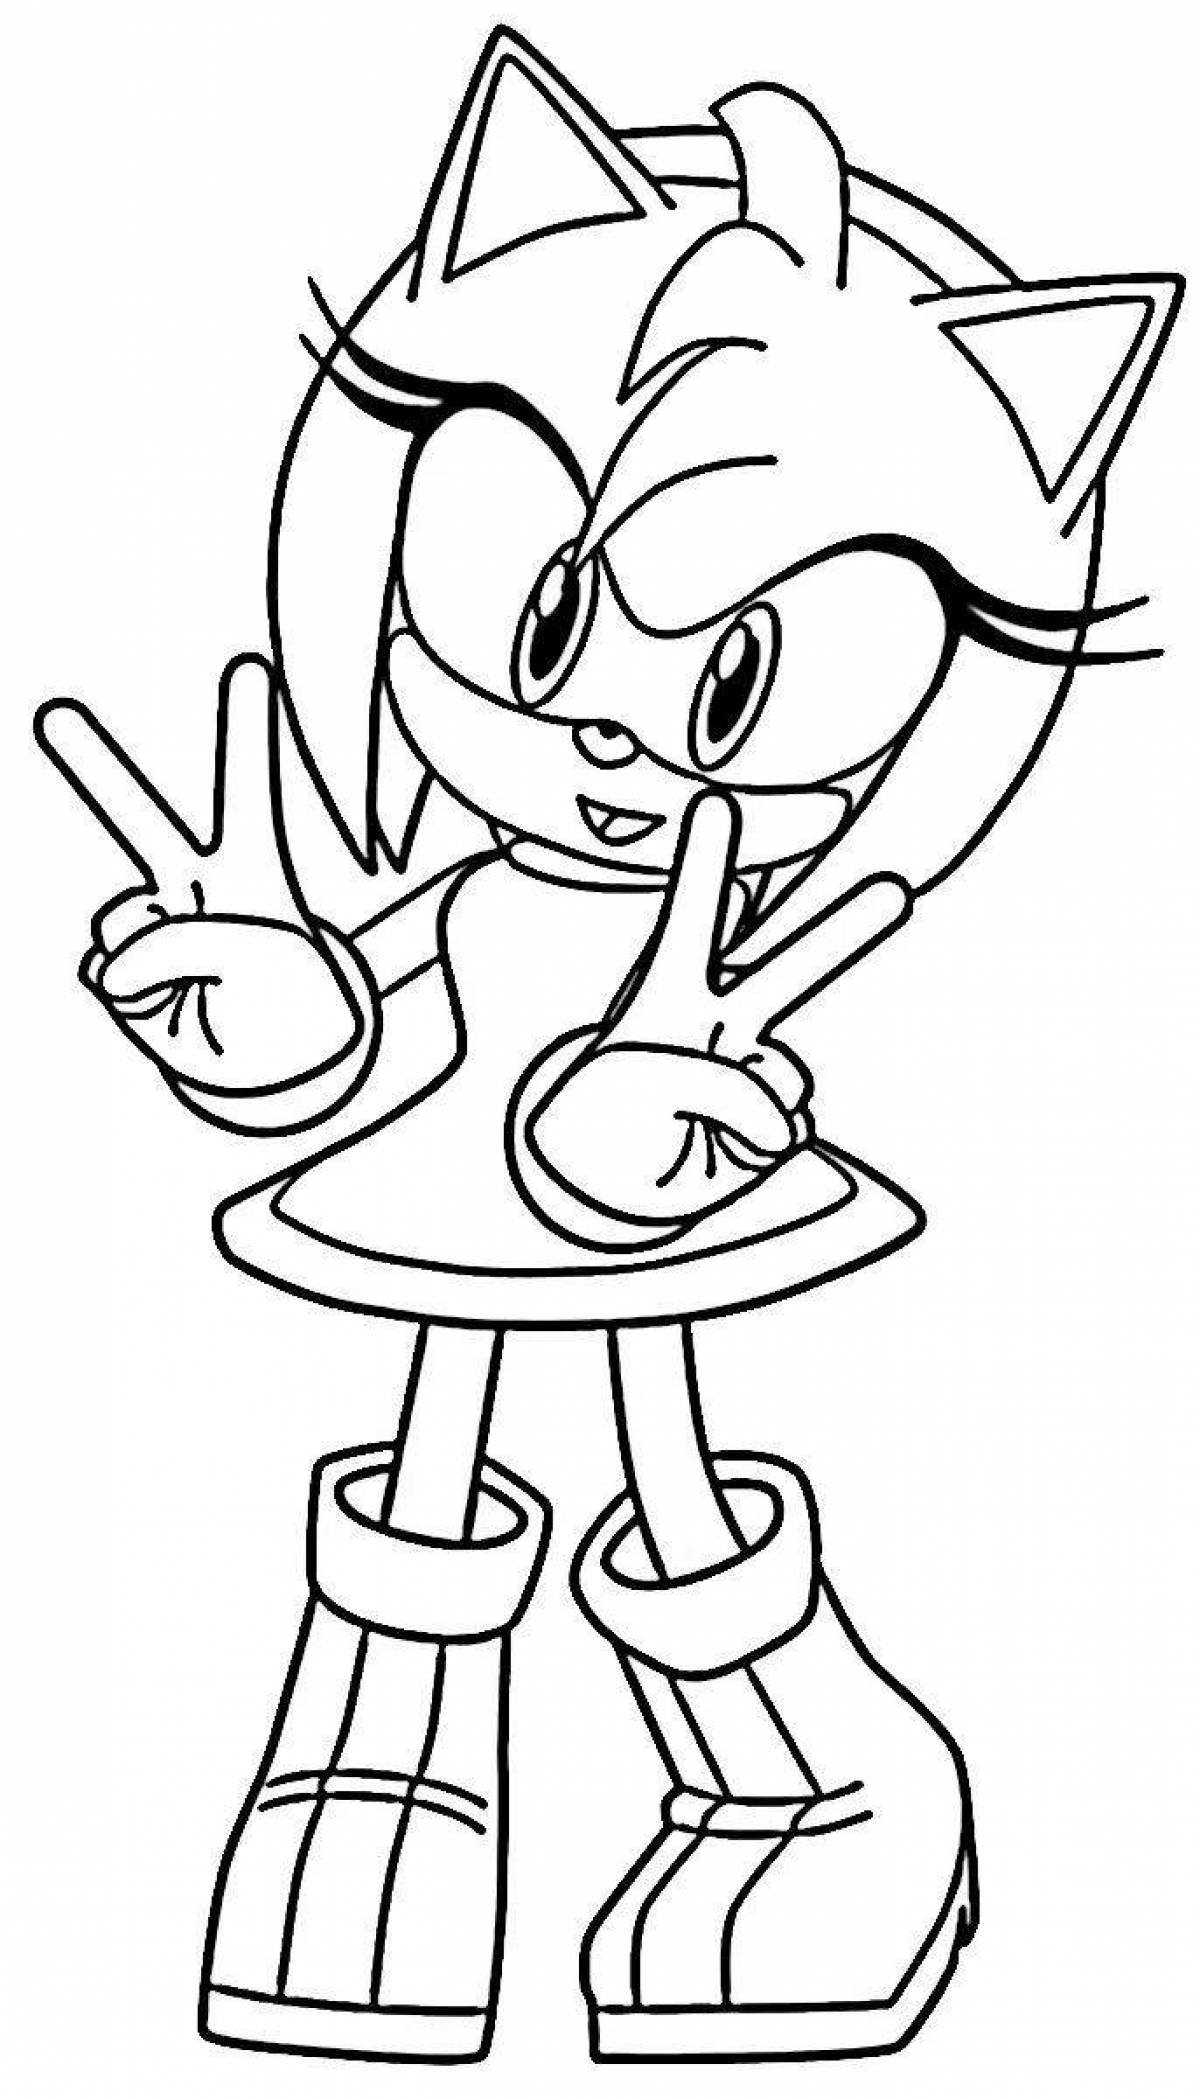 Animated sonic boom coloring book